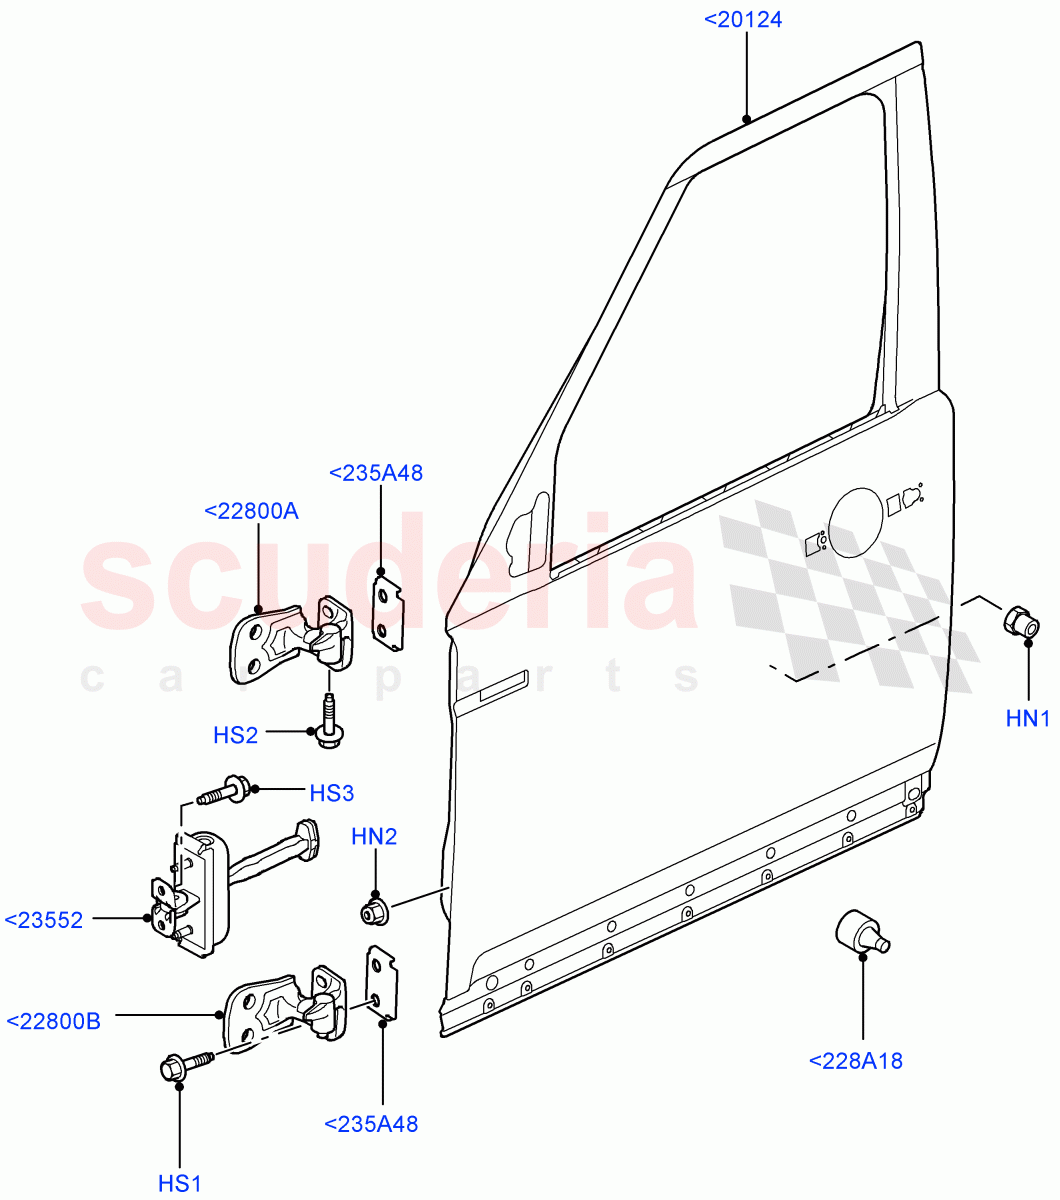 Front Doors, Hinges & Weatherstrips(Door And Fixings)((V)FROMAA000001) of Land Rover Land Rover Discovery 4 (2010-2016) [5.0 OHC SGDI NA V8 Petrol]